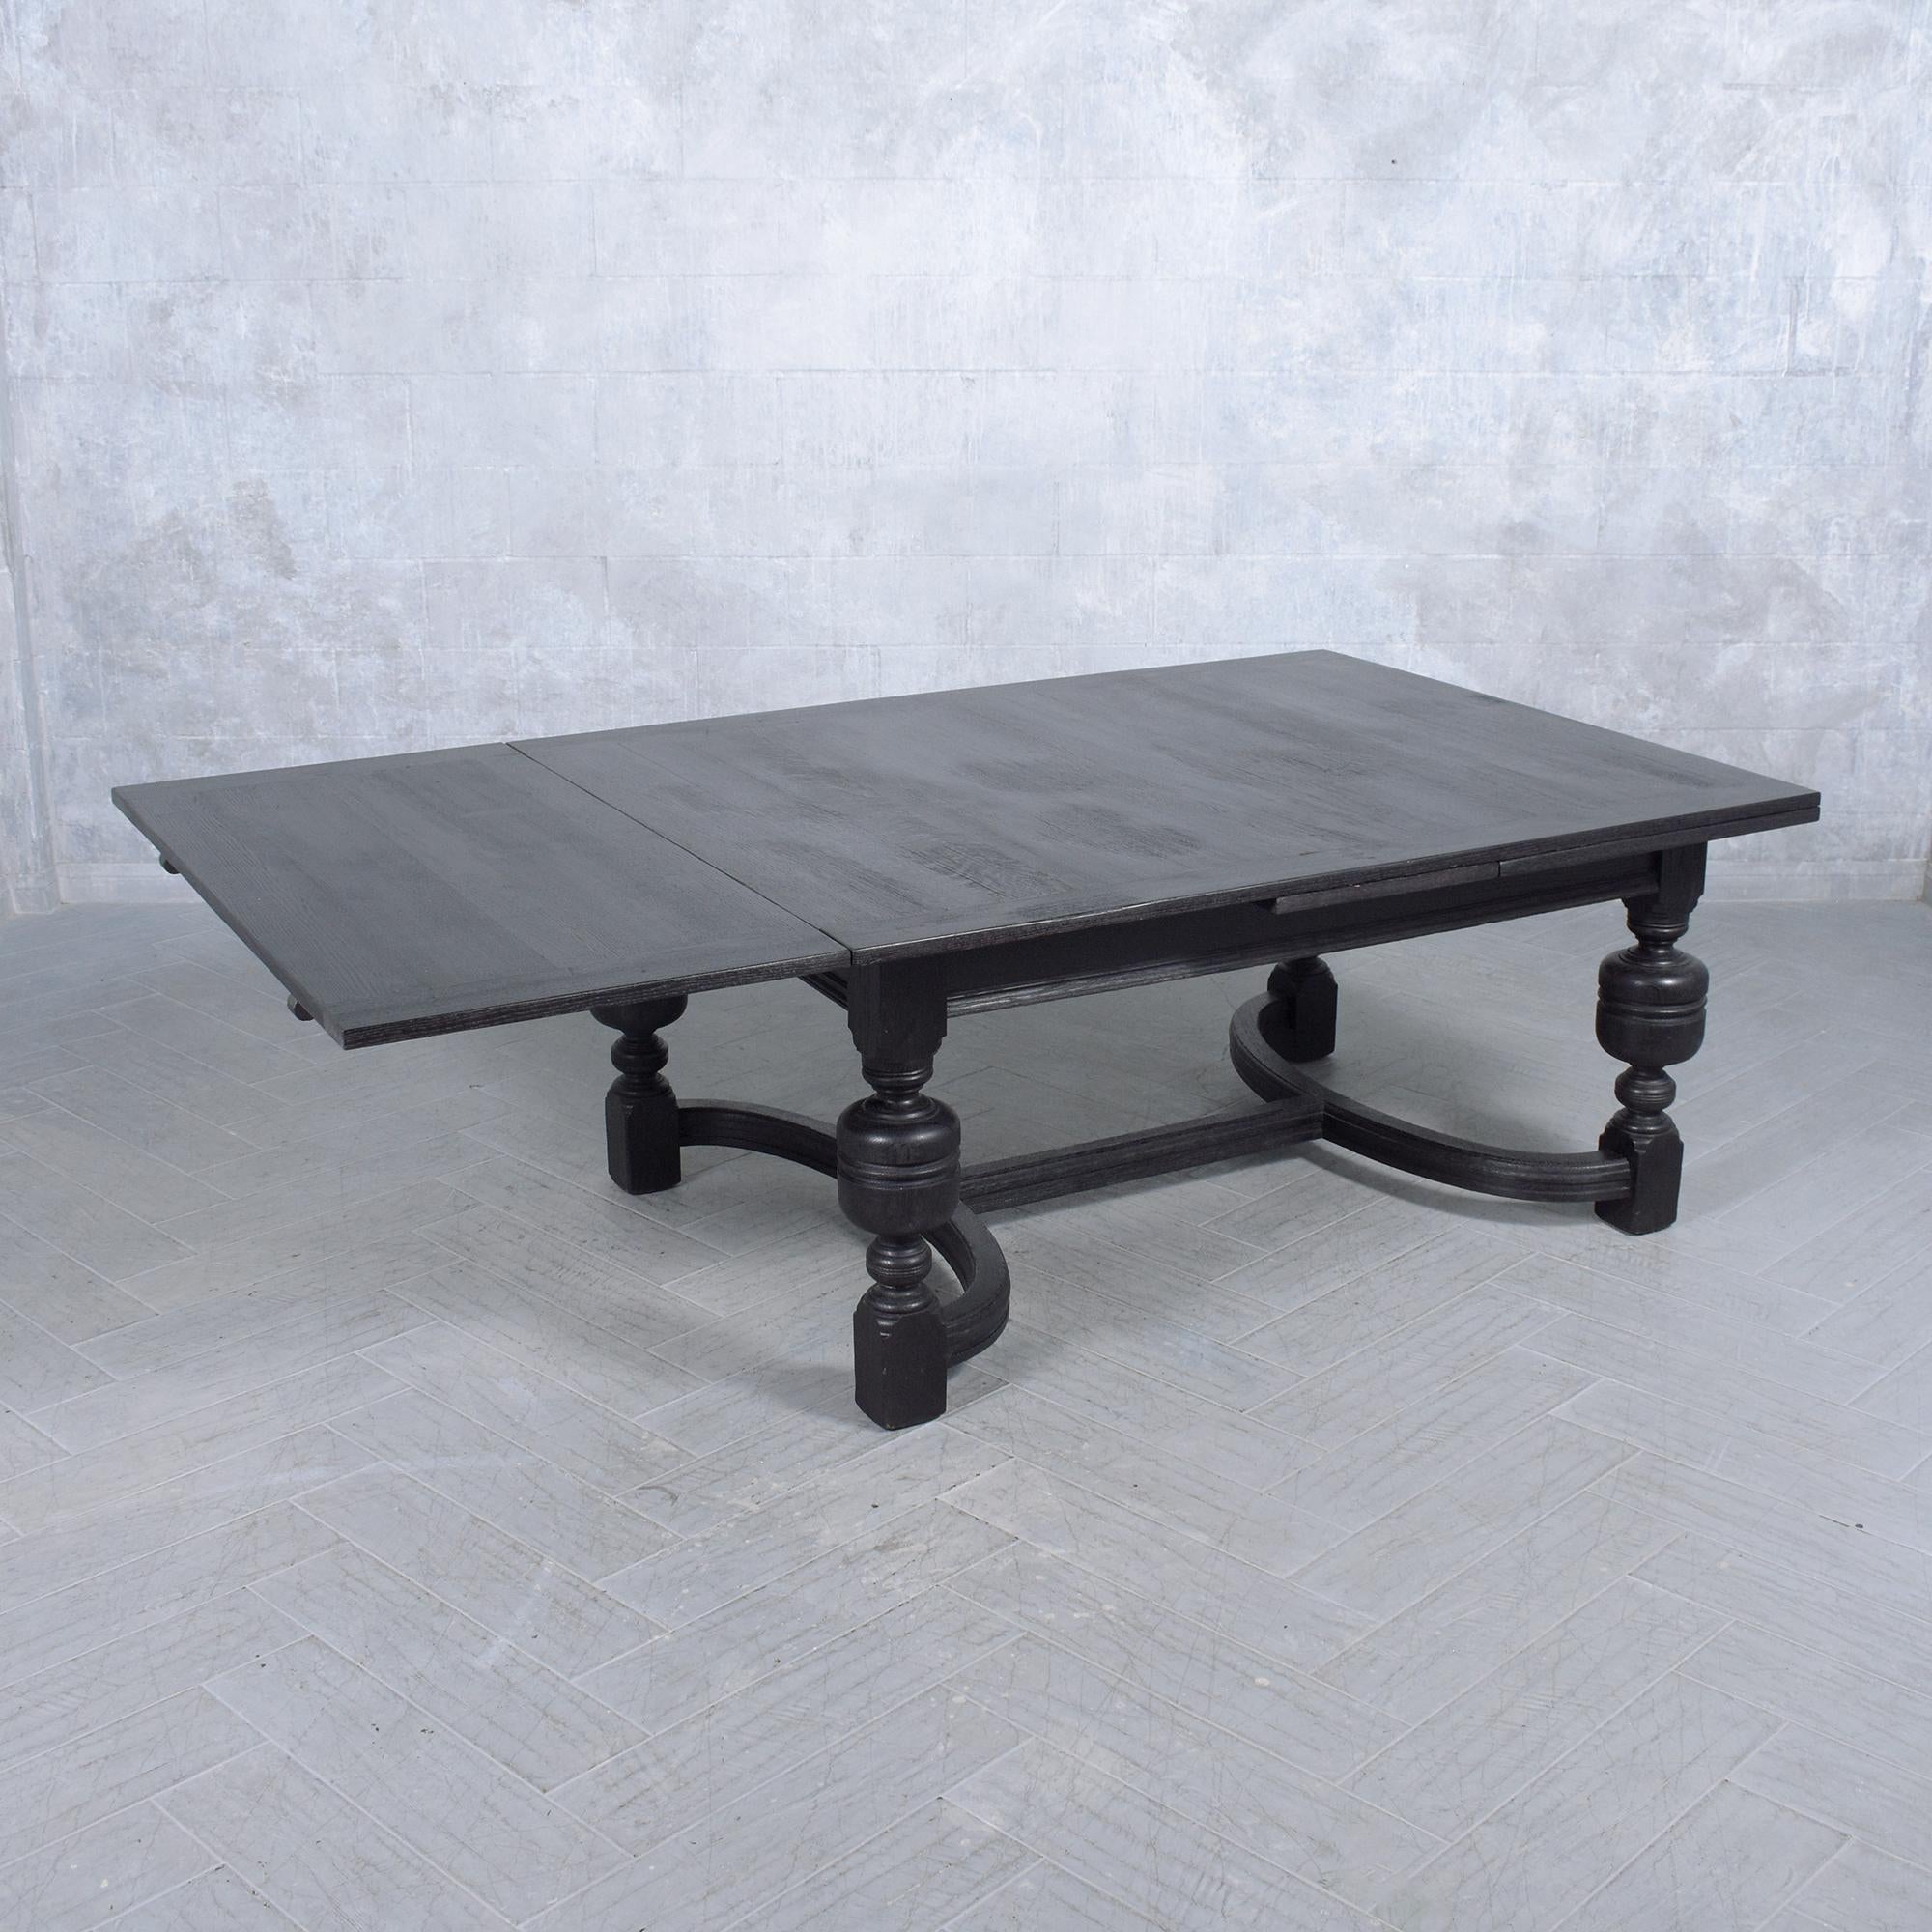 1850s Spanish Extendable Dining Table: Ebonized Solid Wood with French Design For Sale 1